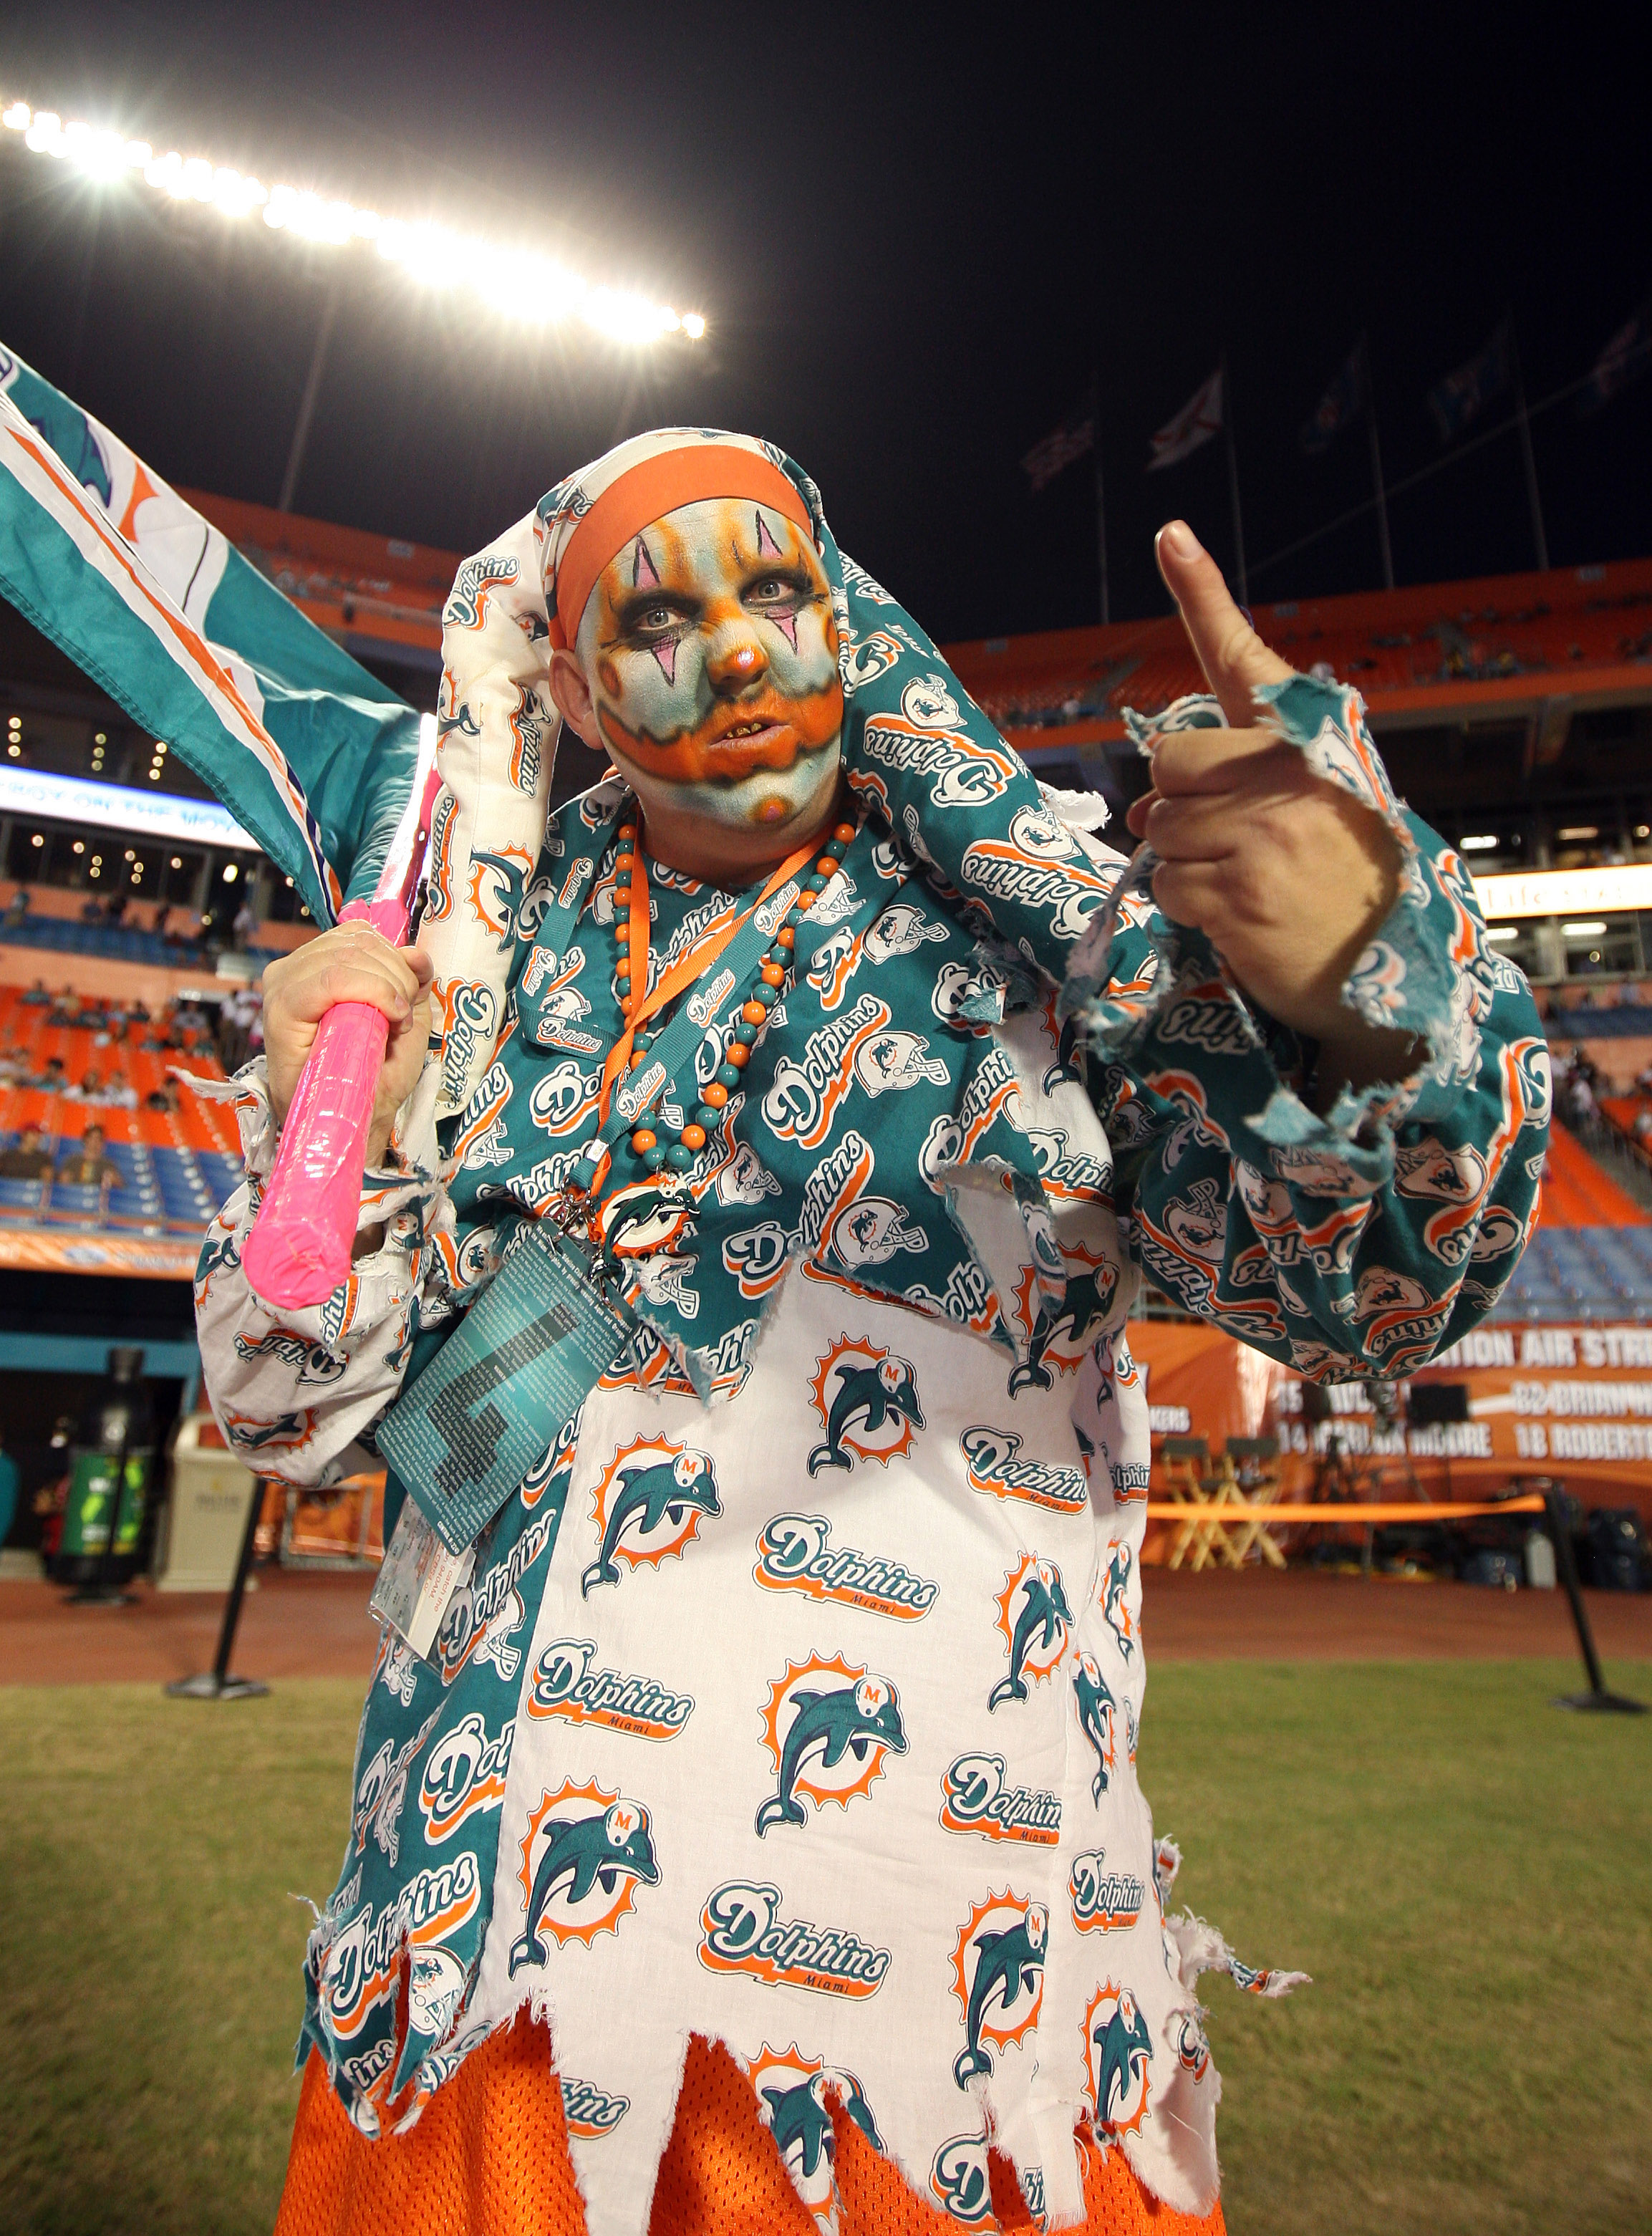 MIAMI - OCTOBER 4: A fan of the Miami Dolphins gets set for the game against the New England Patriots at Sun Life Field on October 4, 2010 in Miami, Florida. (Photo by Scott Cunningham/Getty Images)